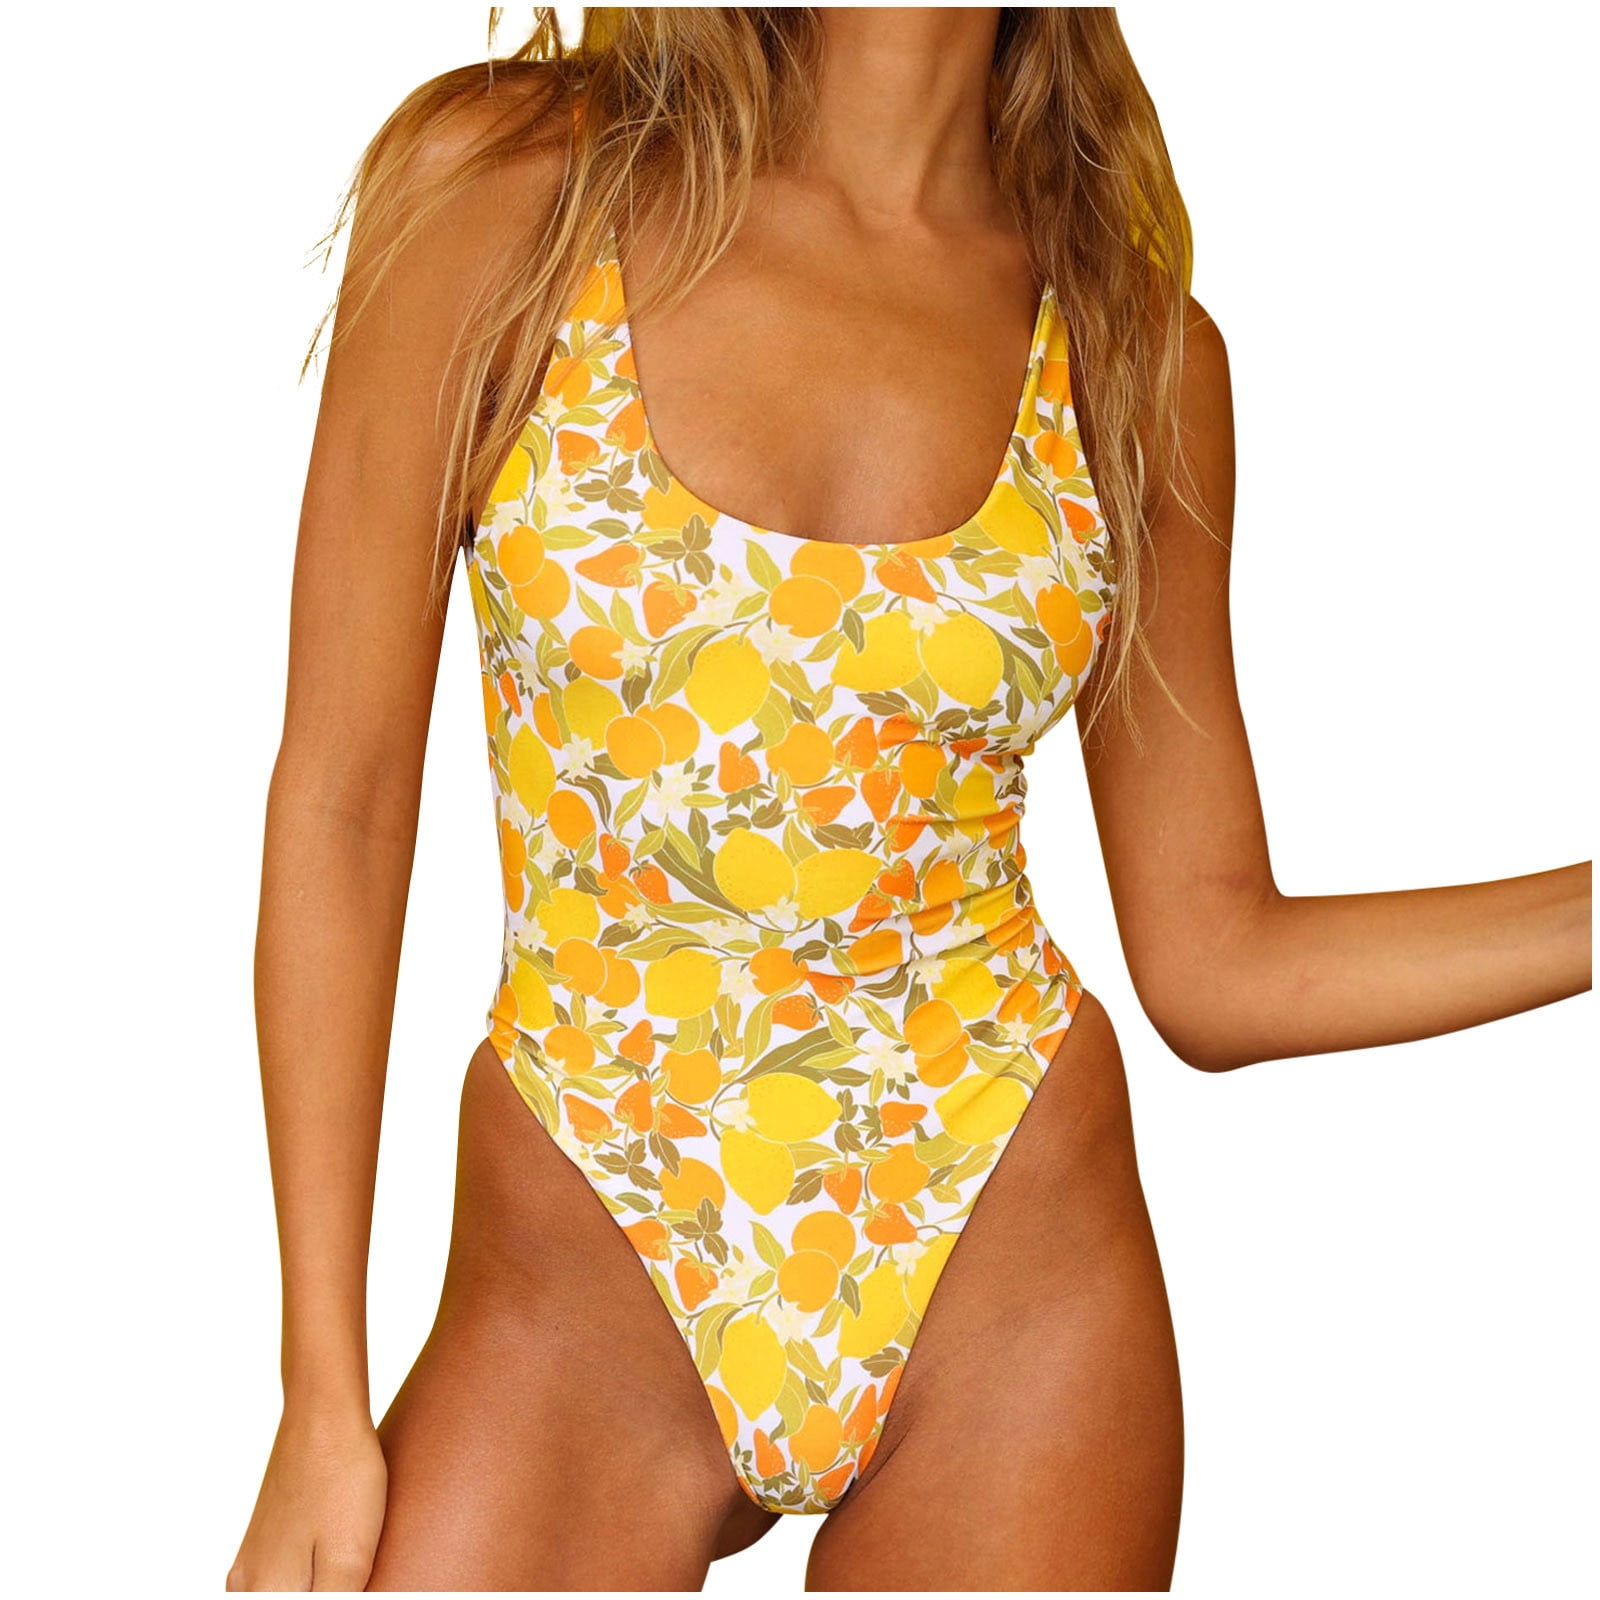 RQYYD Clearance One Piece Swimsuit for Women Bathing Suit High Cut Deep V  Neck Low Back Floral Tummy Control Swimwear(Yellow,L) 